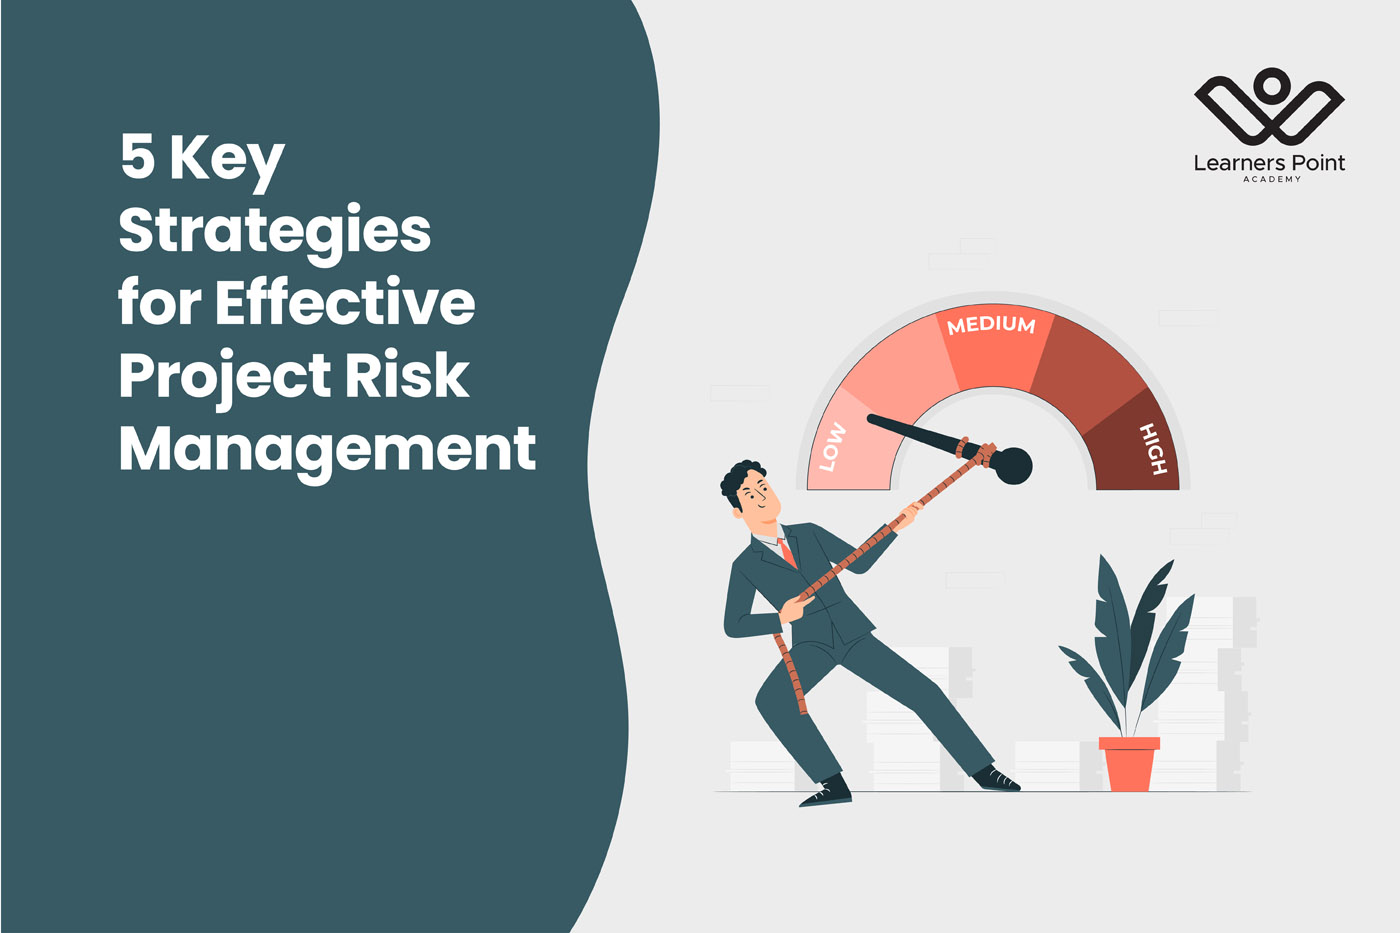 5 Key Strategies for Effective Project Risk Management